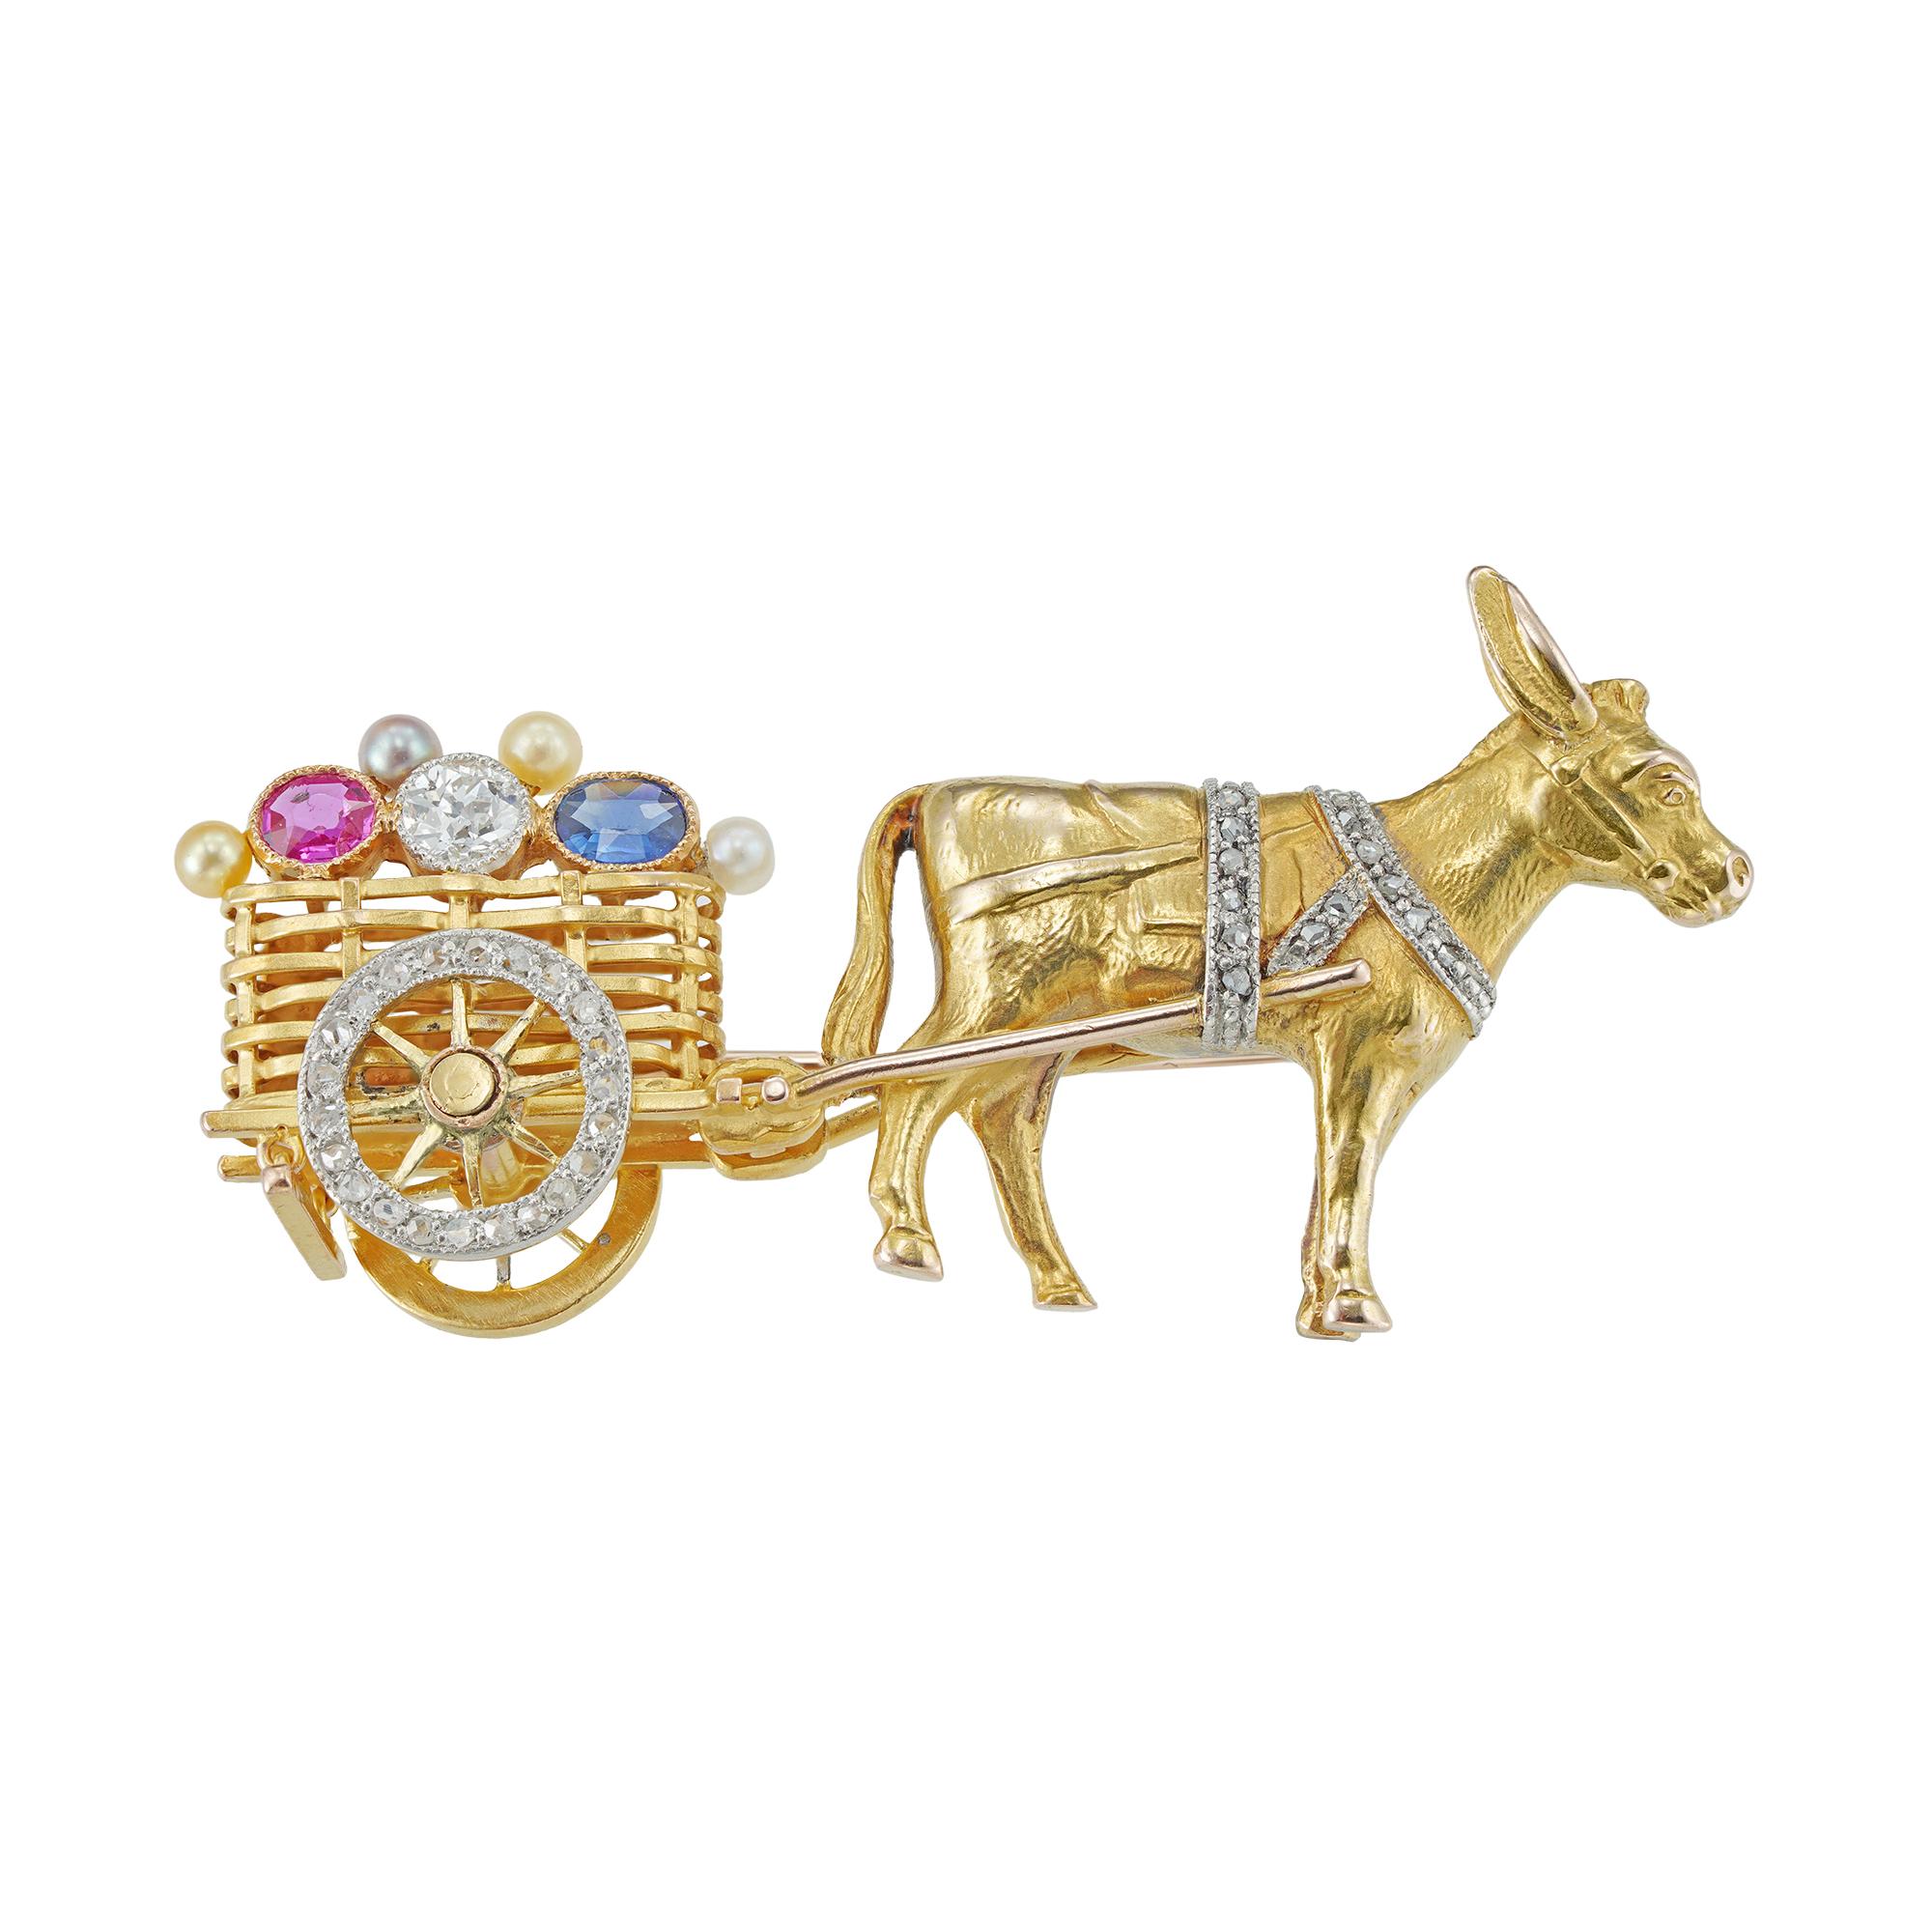 An Edwardian donkey and cart brooch, the yellow gold donkey with diamond-set bridal attached to a cart, the cart designed as a basket with a diamond-set wheel, sitting on top of the cart a ruby, diamond and sapphire with four seed pearls, circa